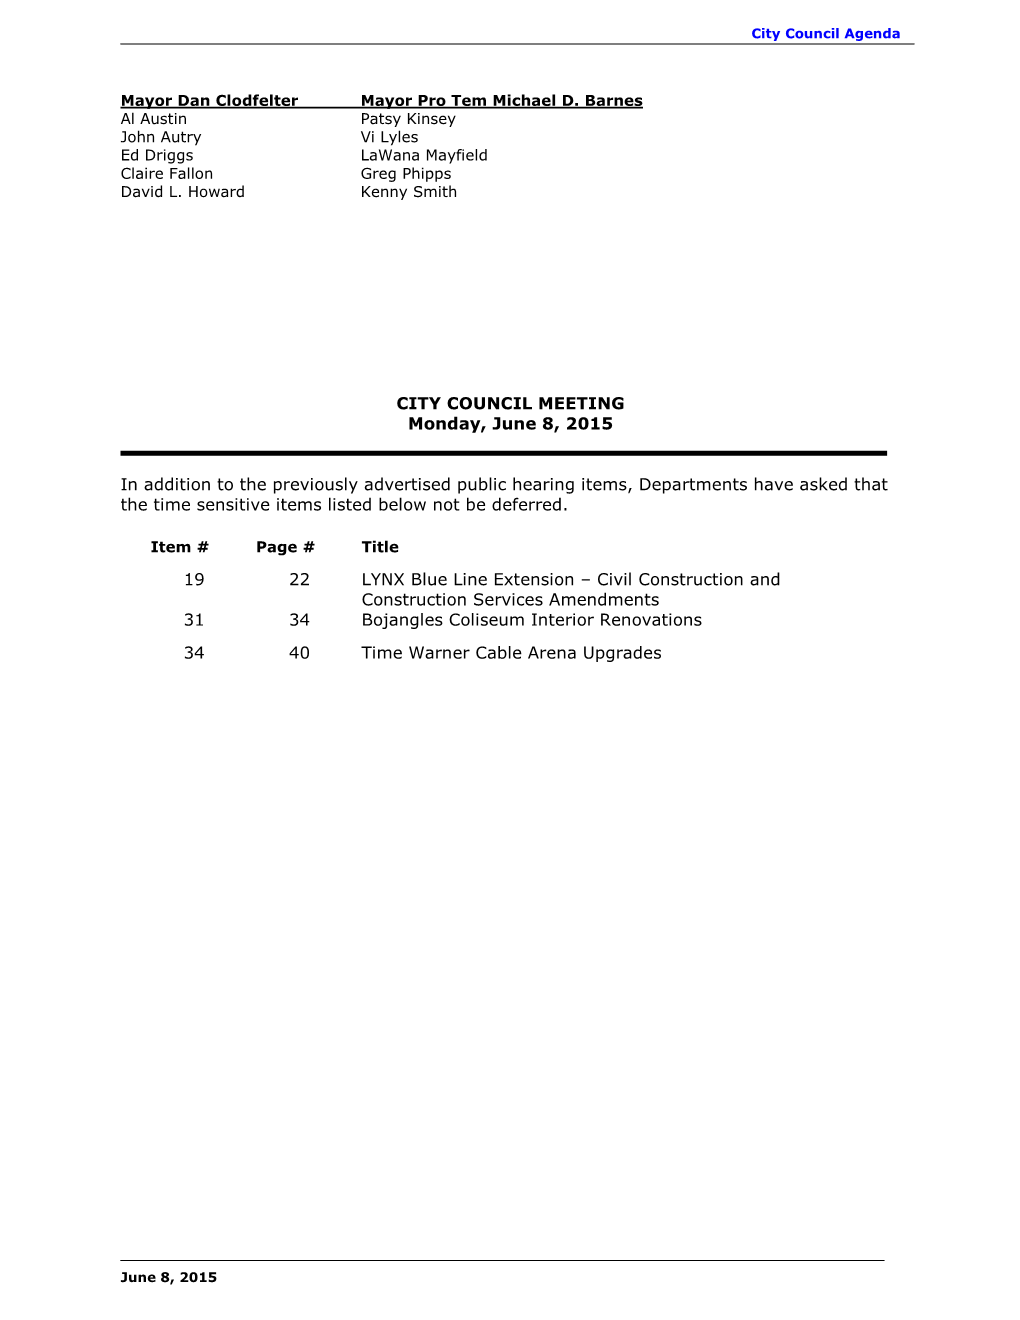 CITY COUNCIL MEETING Monday, June 8, 2015 in Addition to The